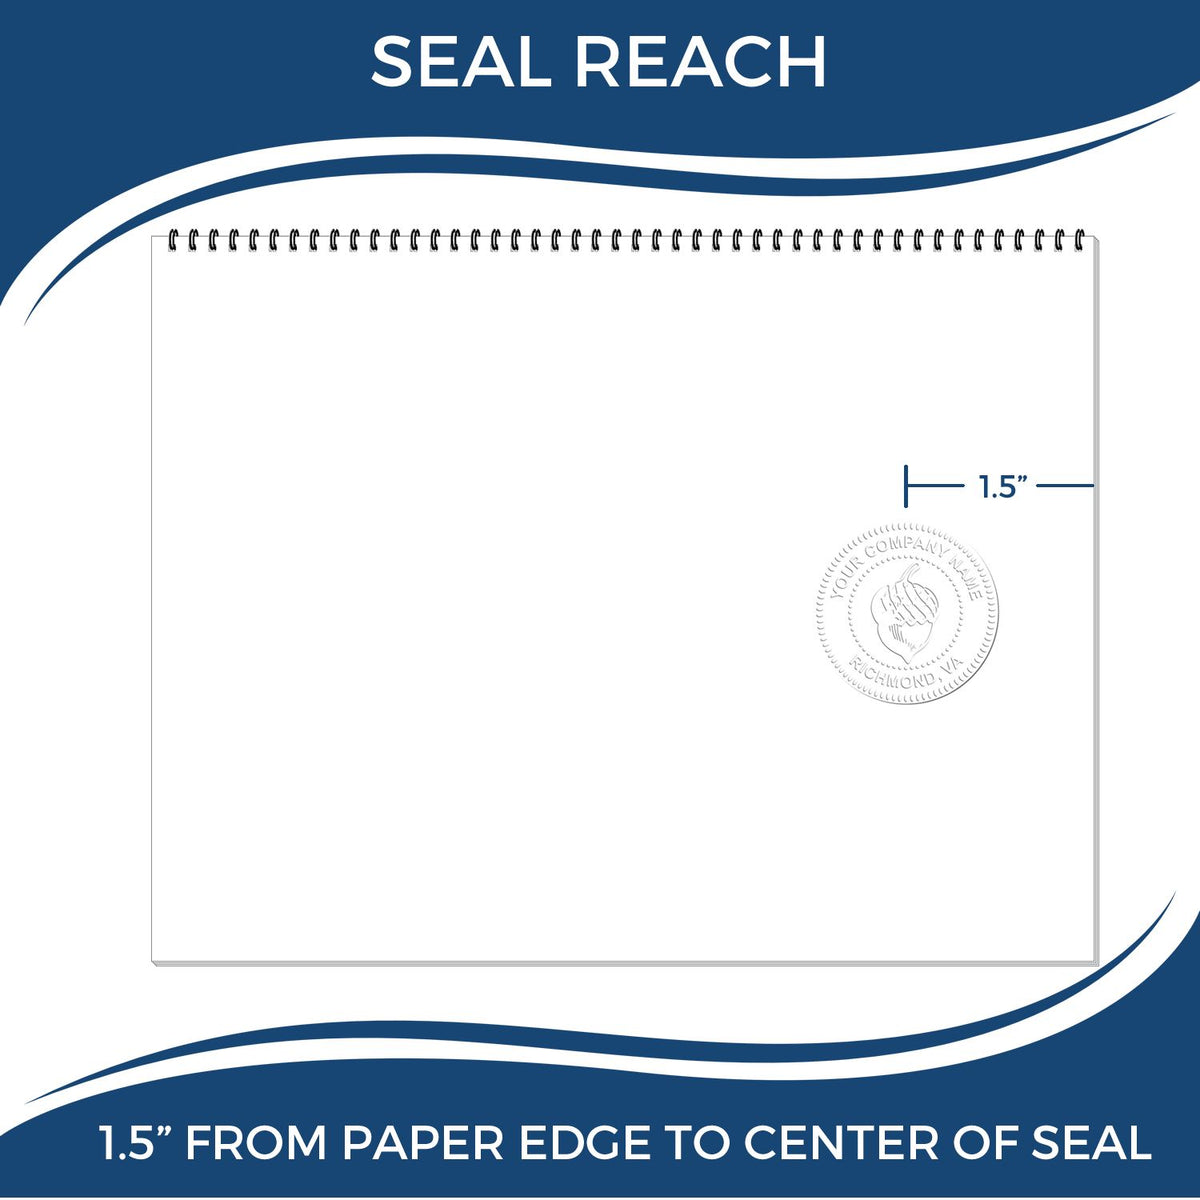 An infographic showing the seal reach which is represented by a ruler and a miniature seal image of the Gift New Mexico Landscape Architect Seal